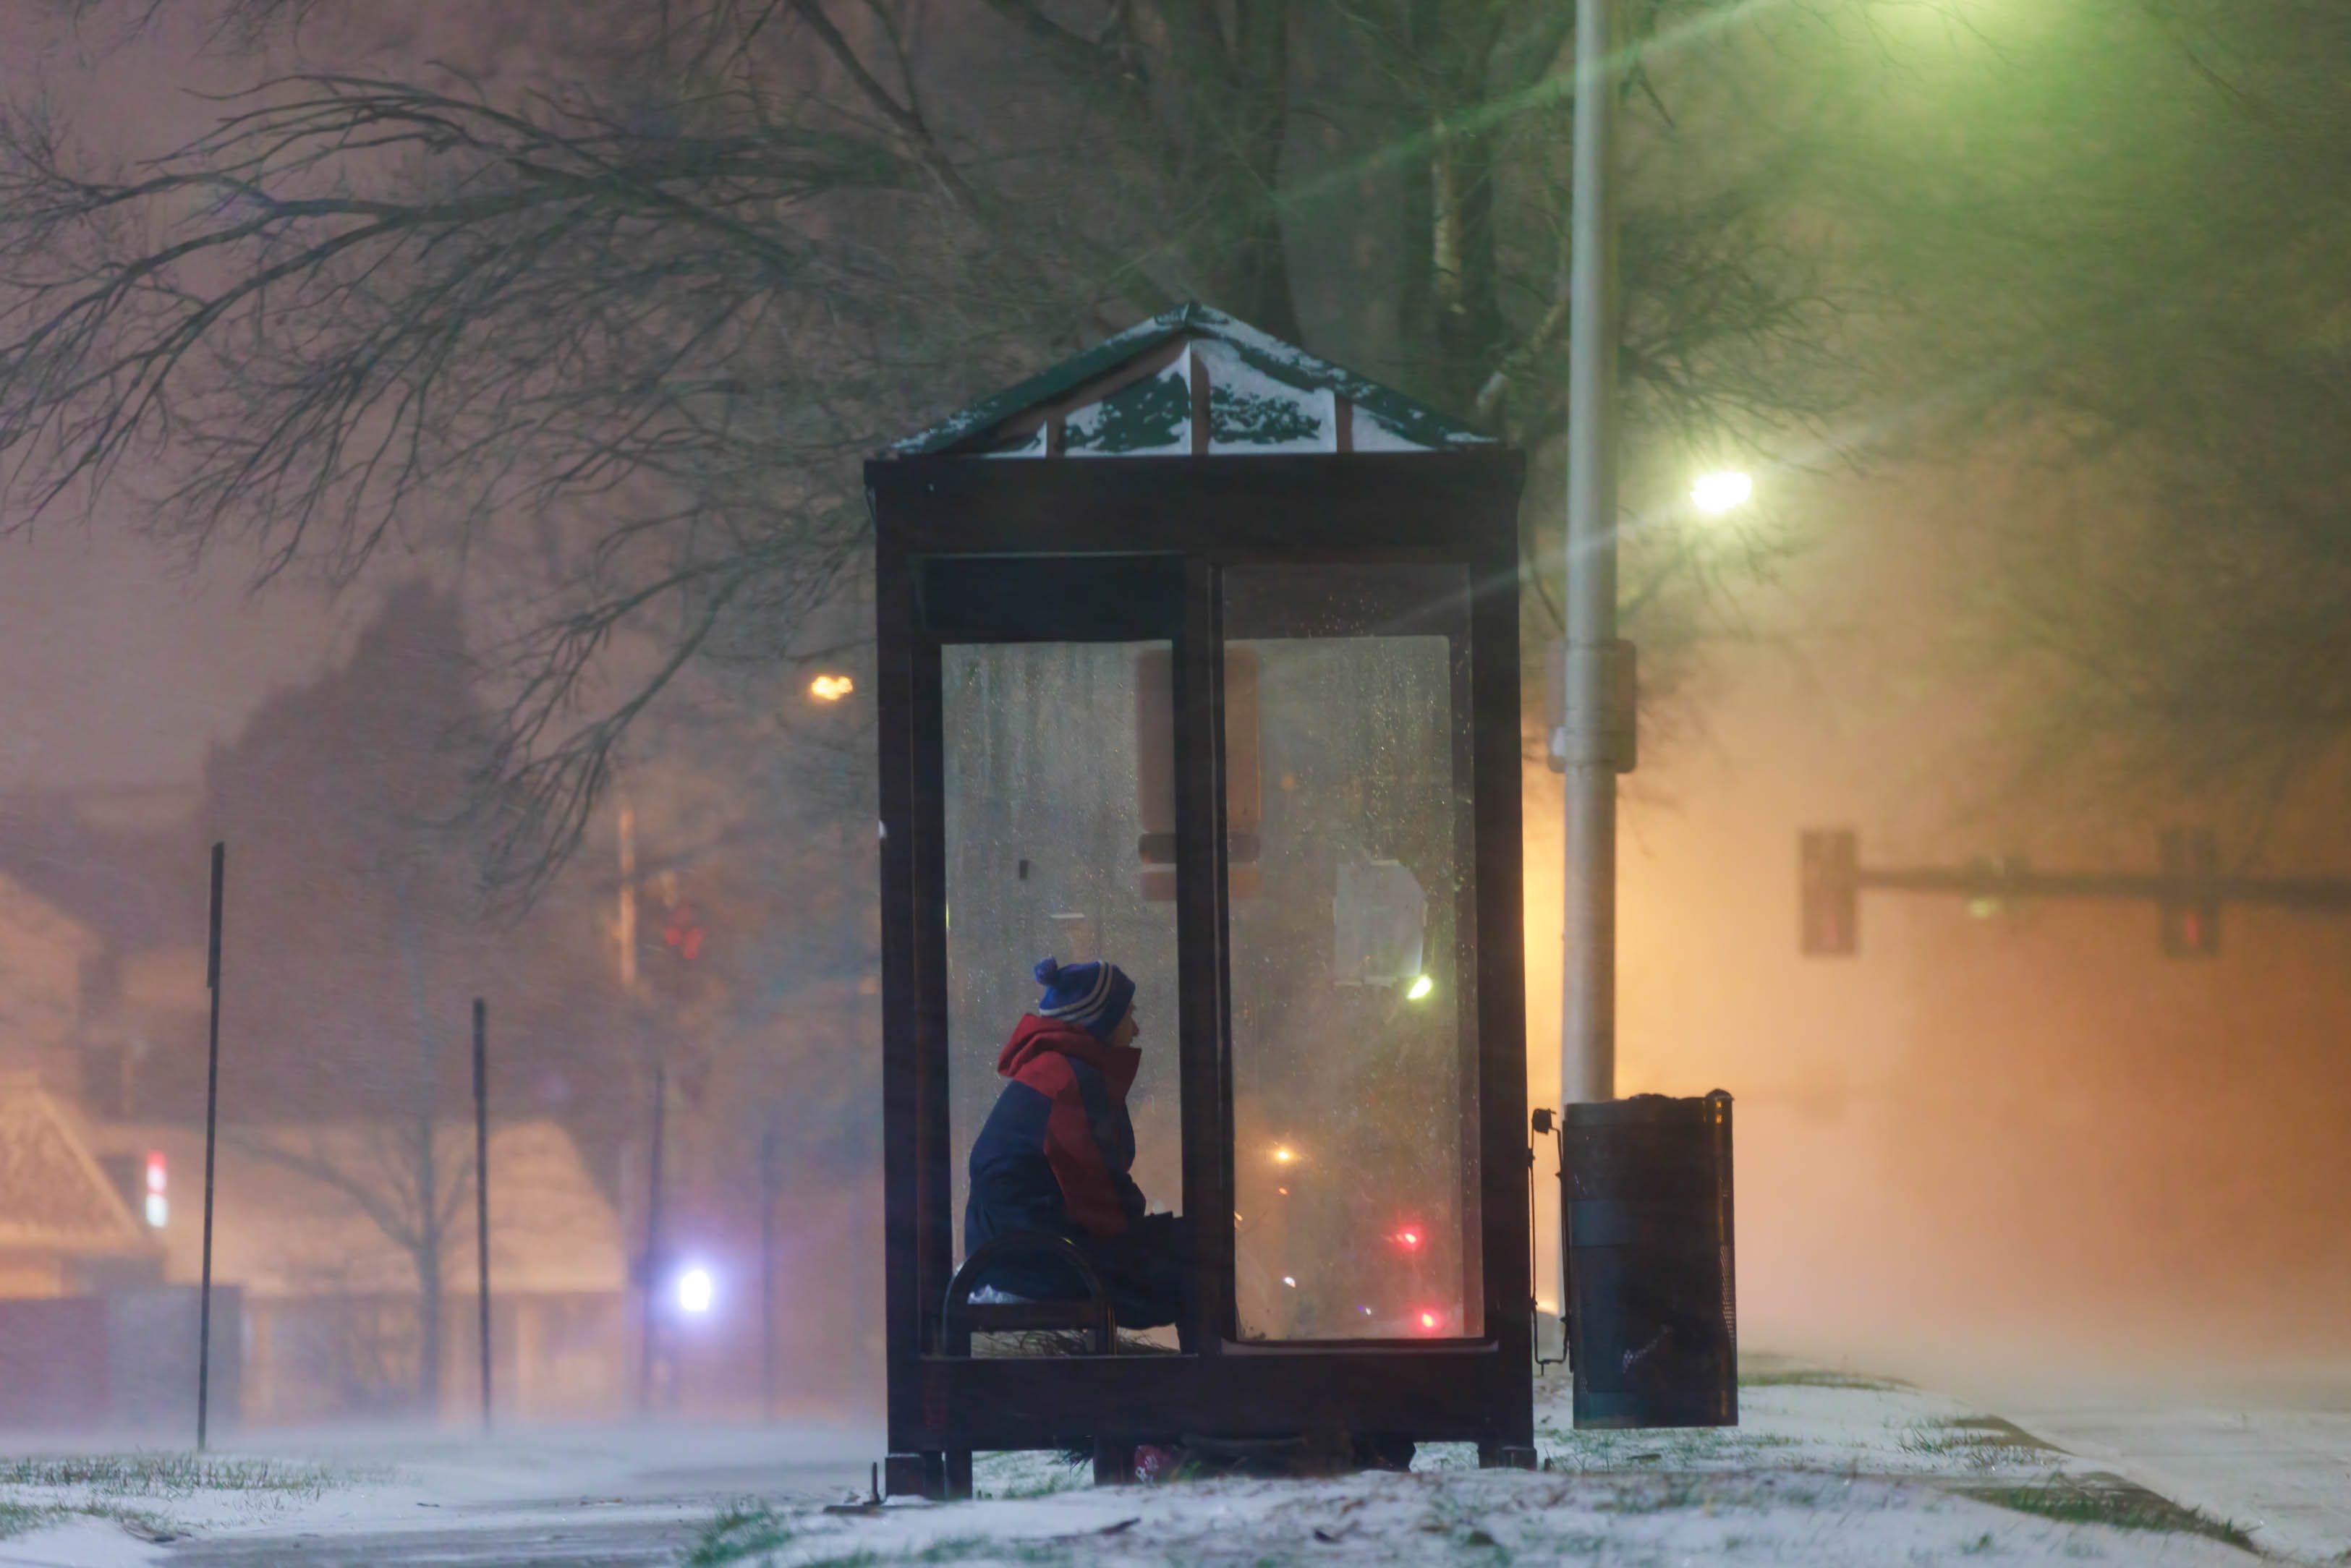 A person sits in a bus shelter during a winter storm in